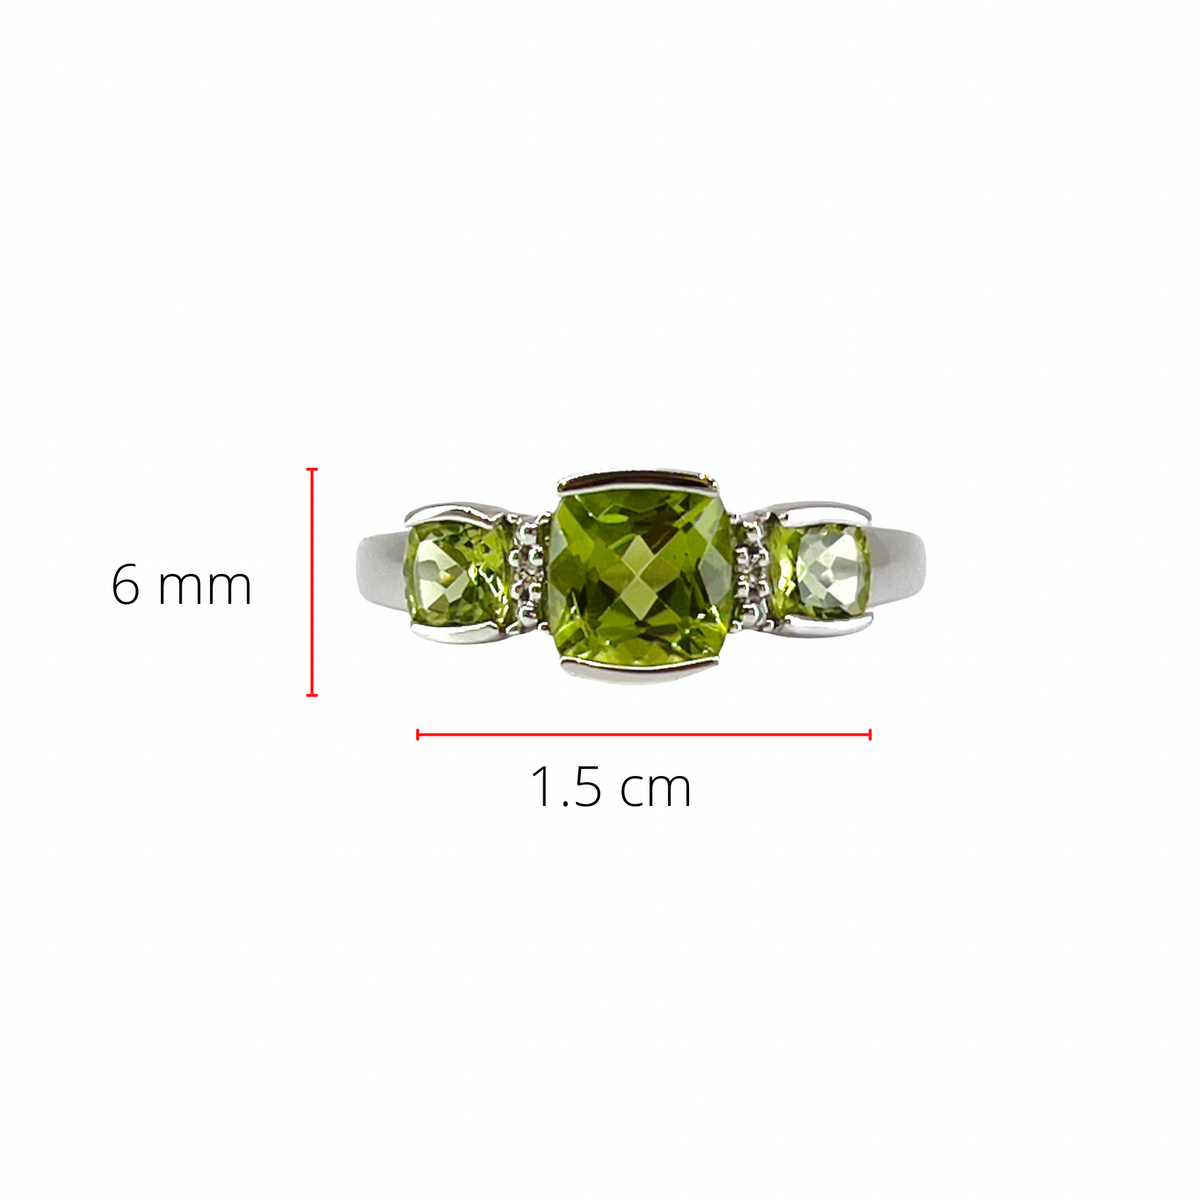 10K White Gold 1.50cttw Genuine Peridot and 0.014cttw Diamond Ring, size 7